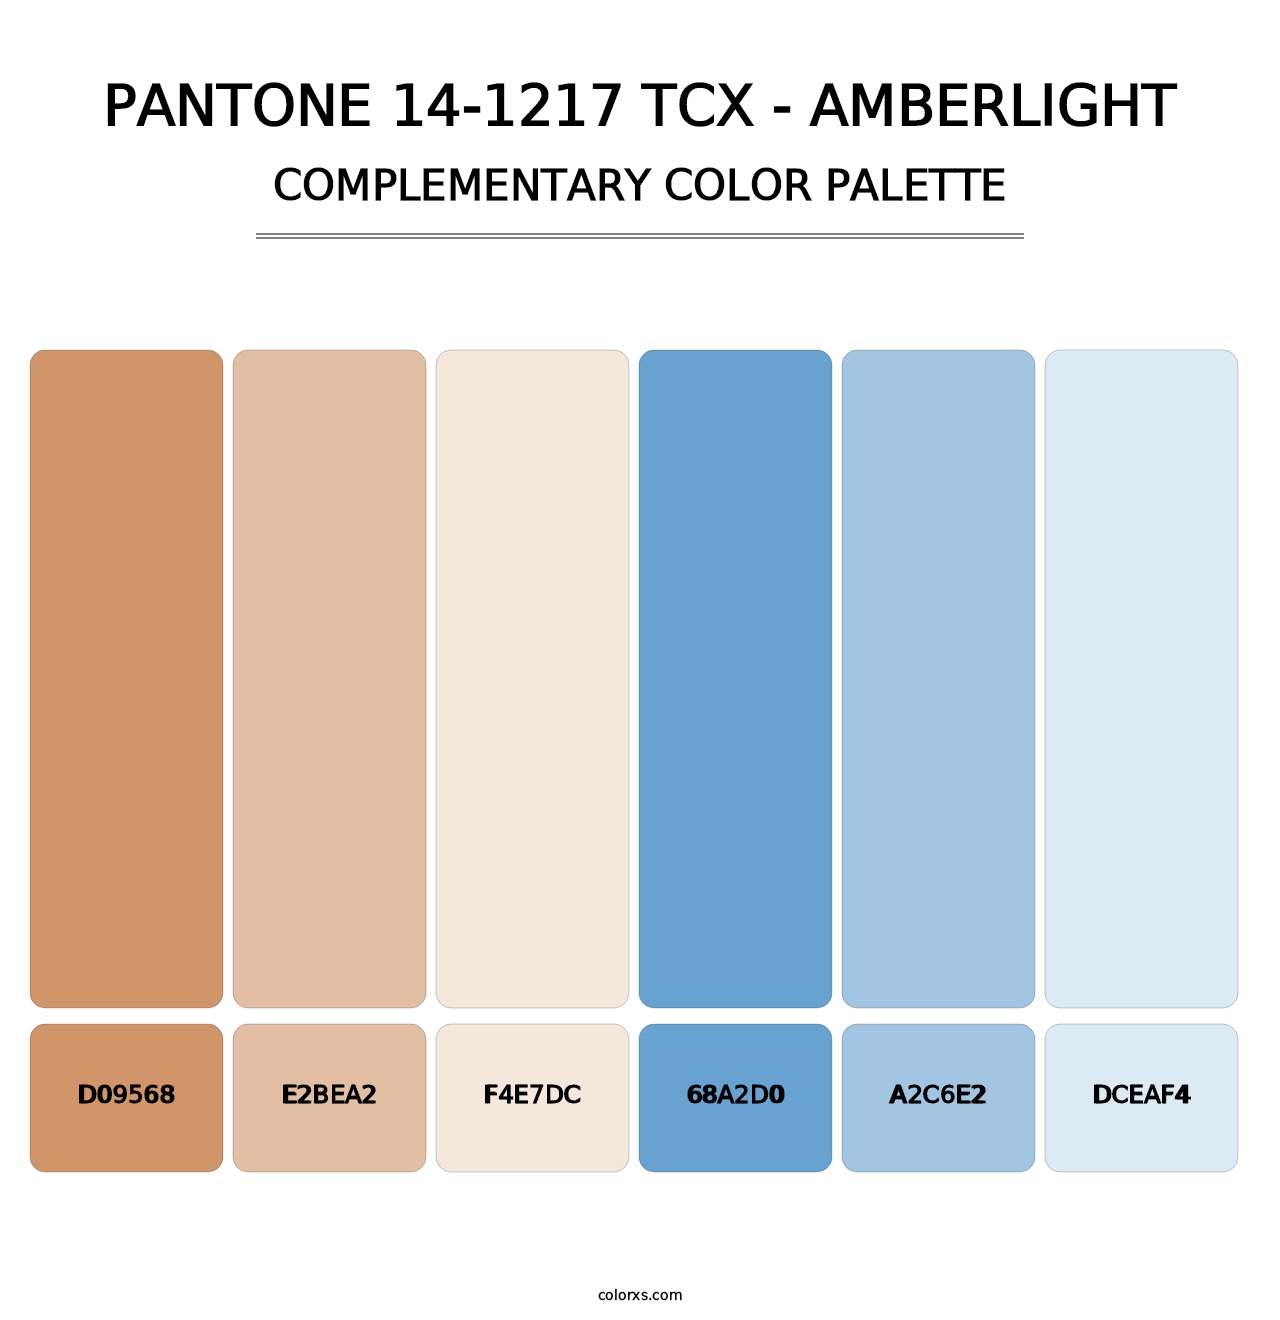 PANTONE 14-1217 TCX - Amberlight - Complementary Color Palette